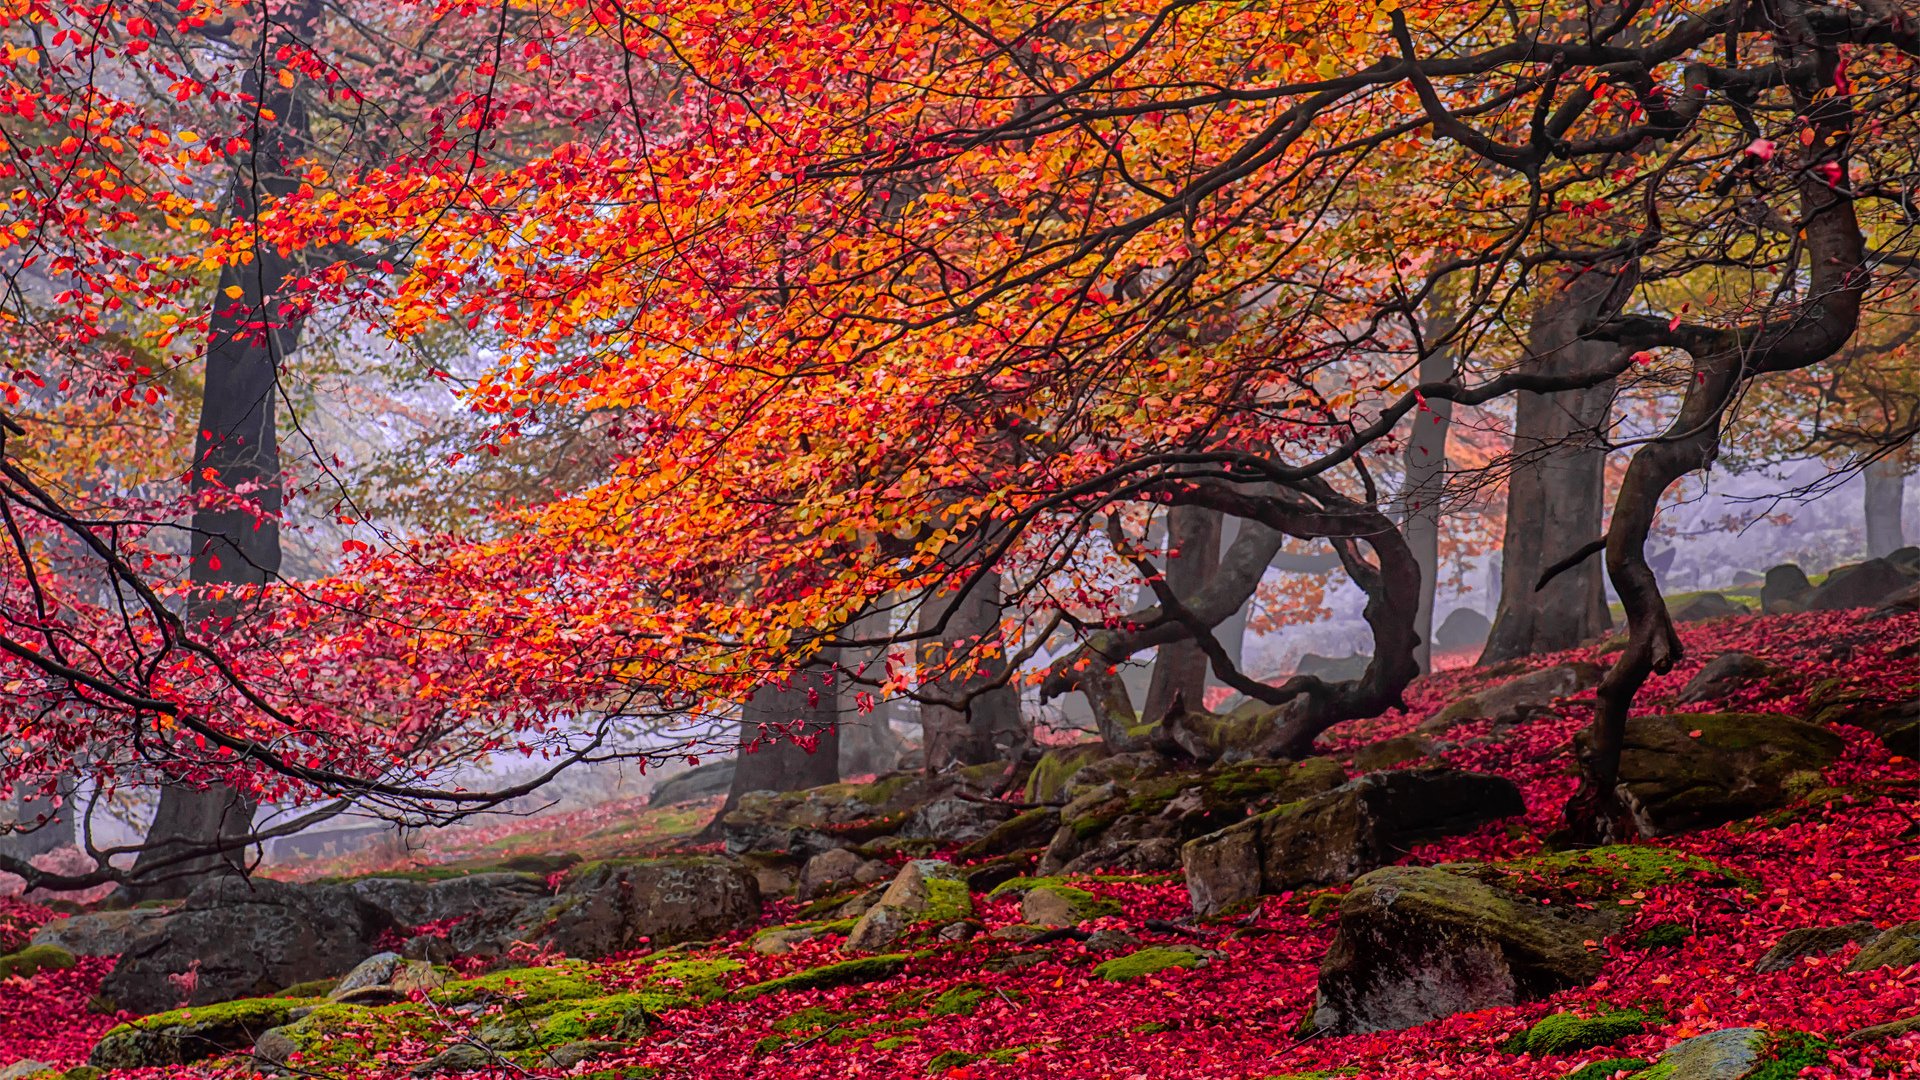 curves, Red, Rocks, Yellow, Trees, Leaves, Autumn Wallpaper